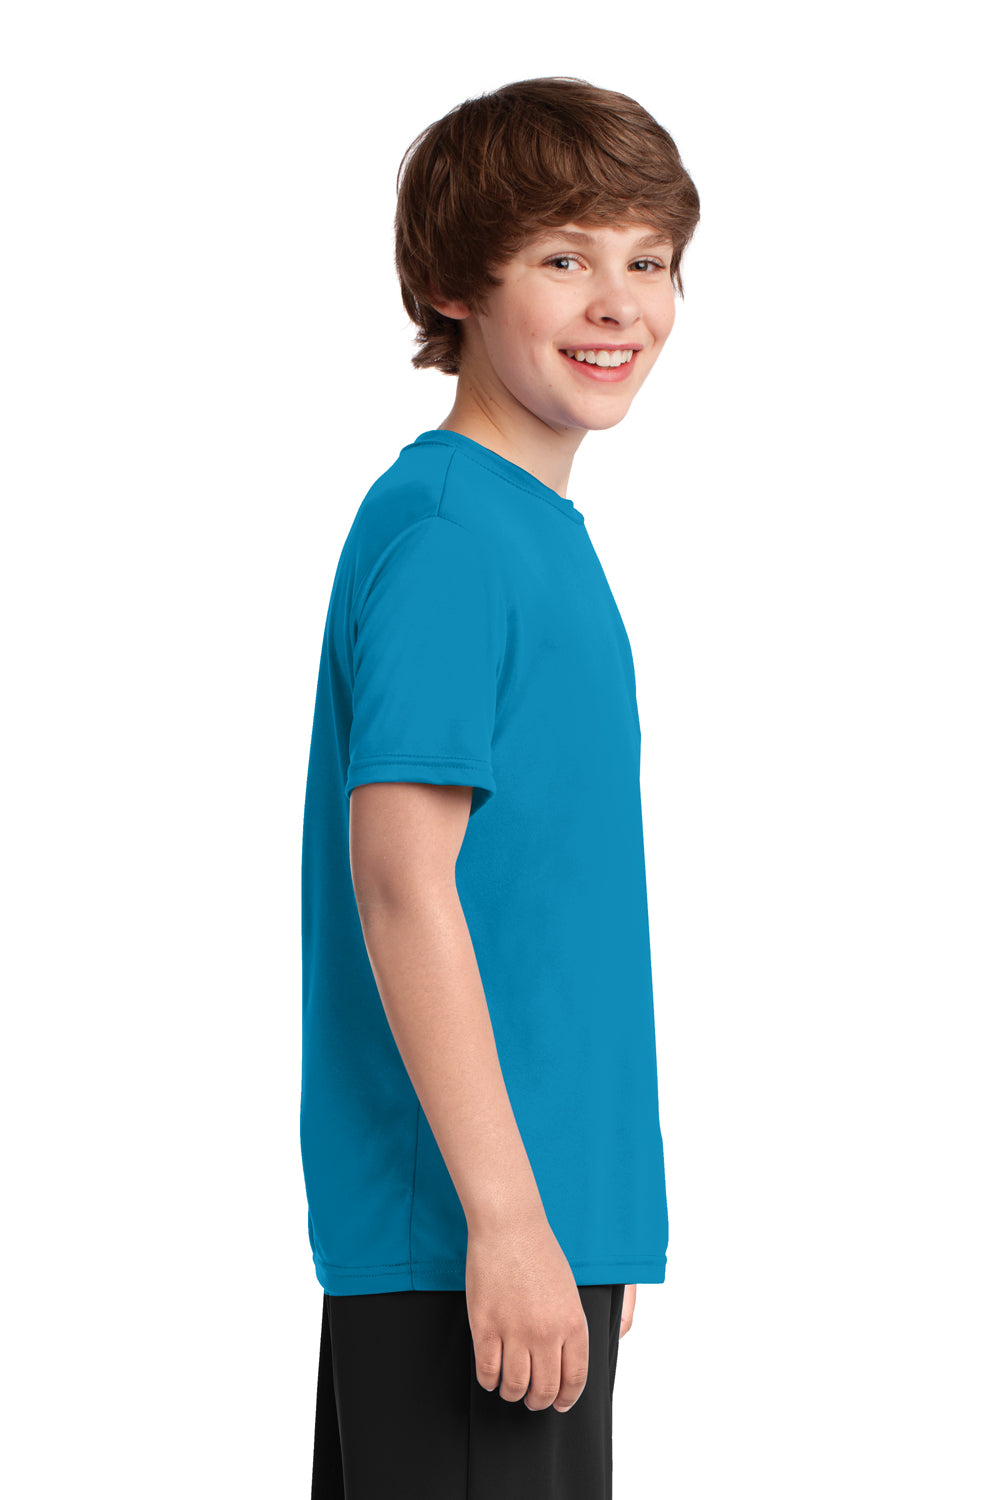 Port & Company PC380Y Youth Dry Zone Performance Moisture Wicking Short Sleeve Crewneck T-Shirt Neon Blue Side